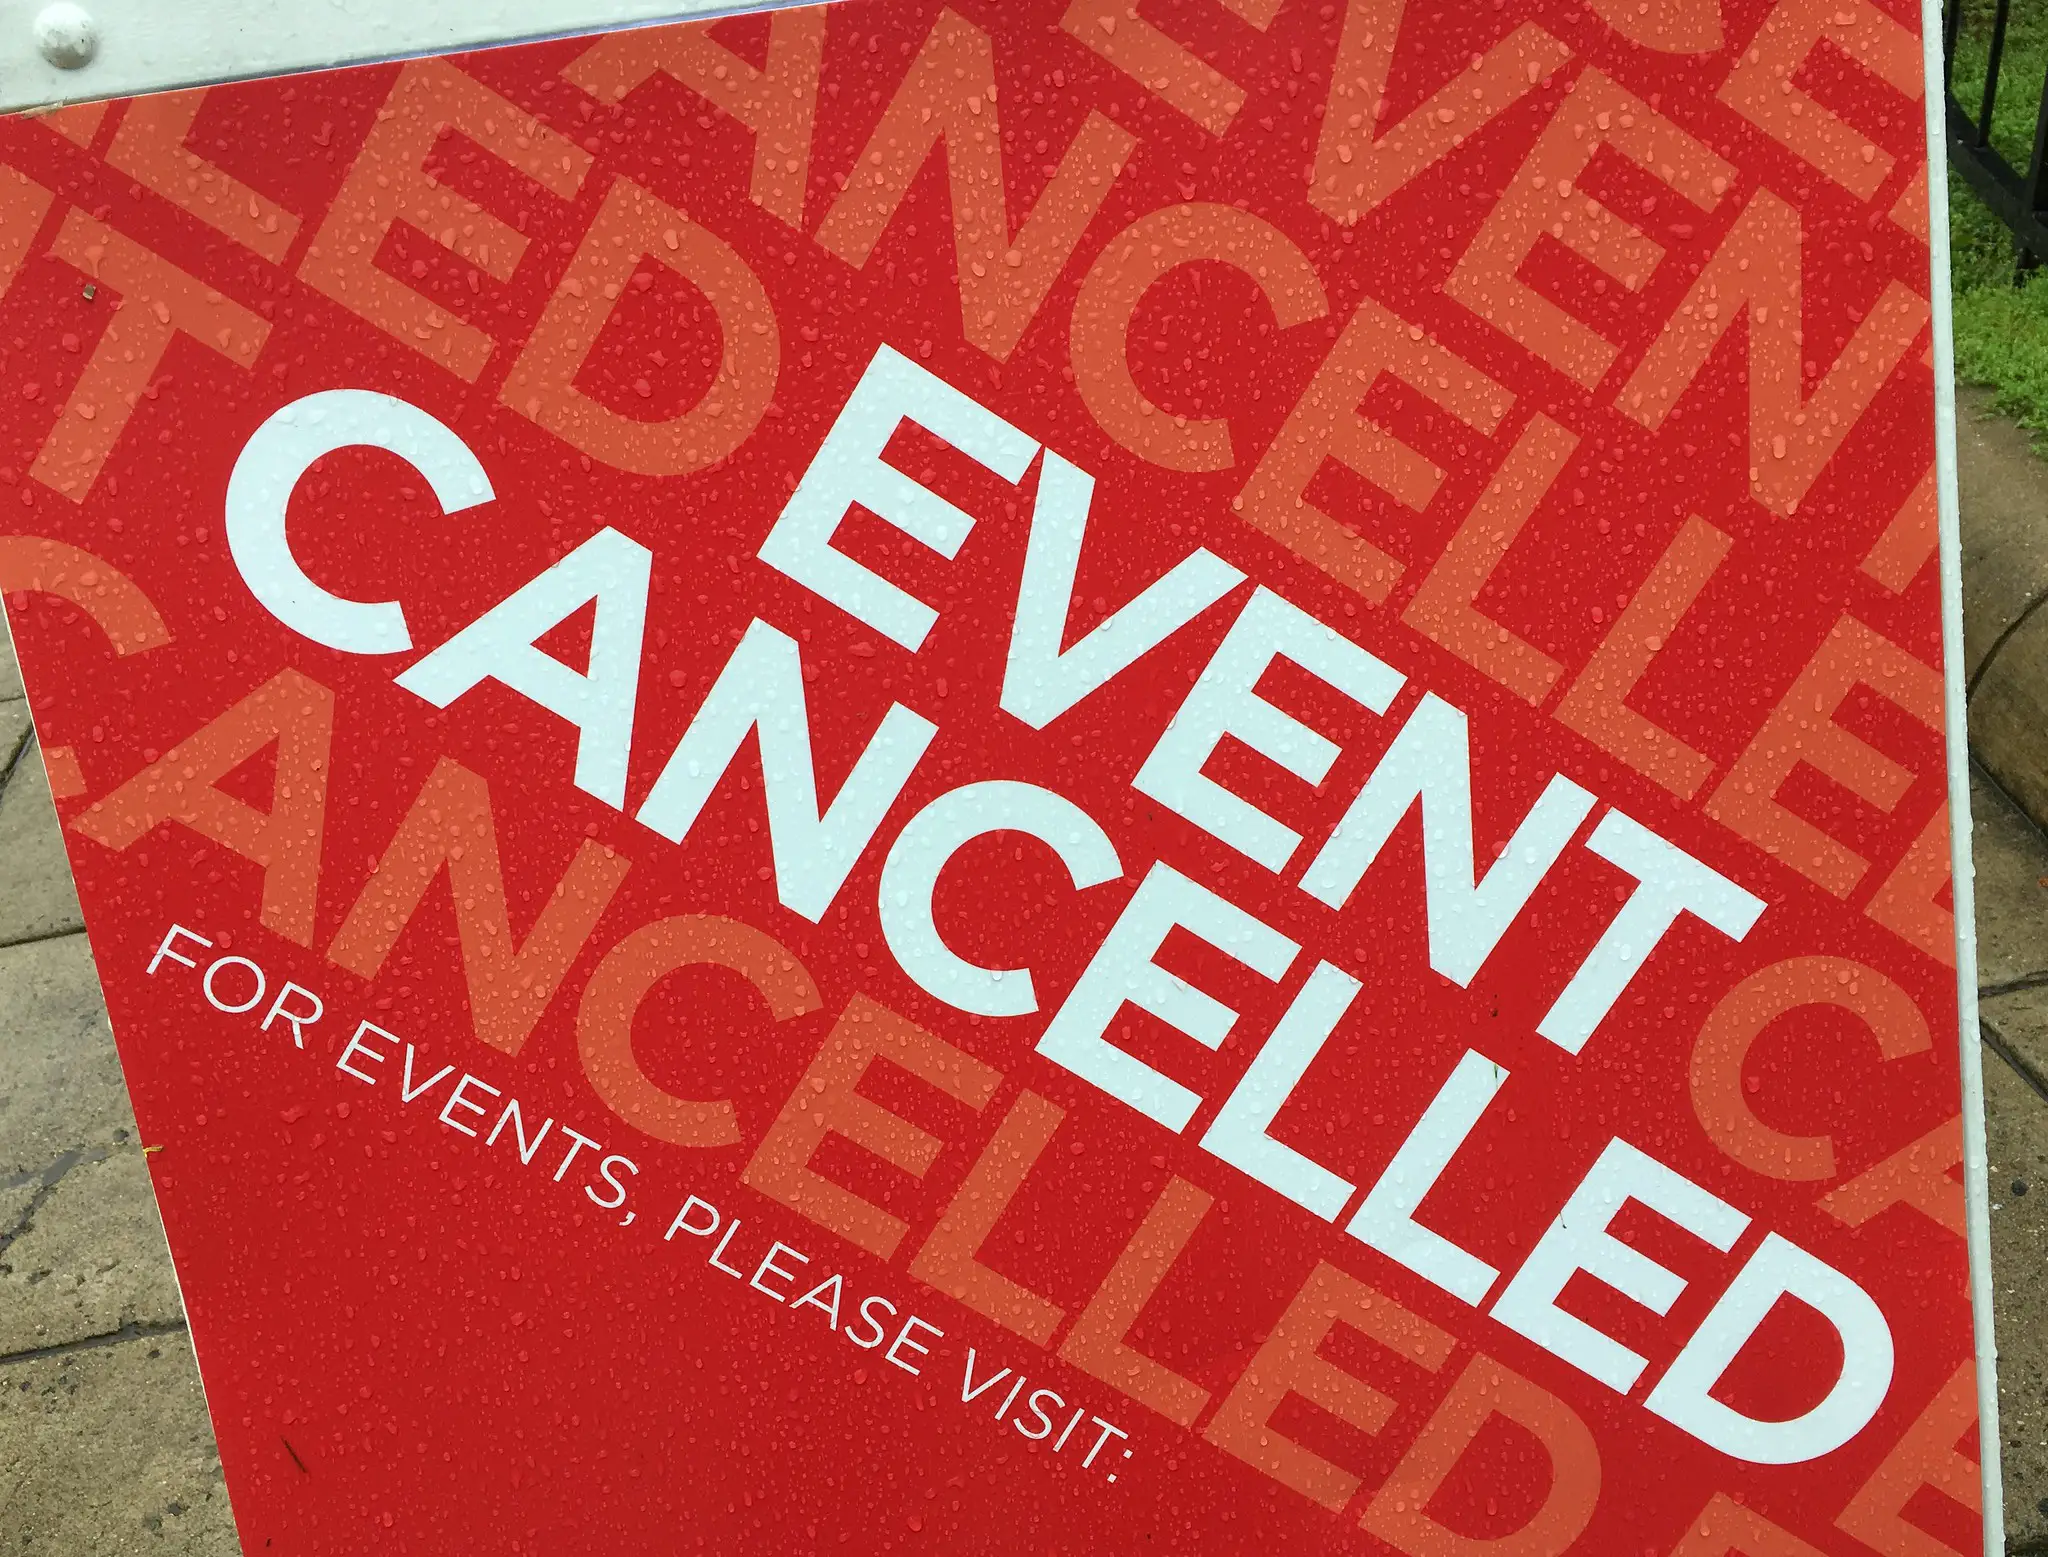 event cancelled poster